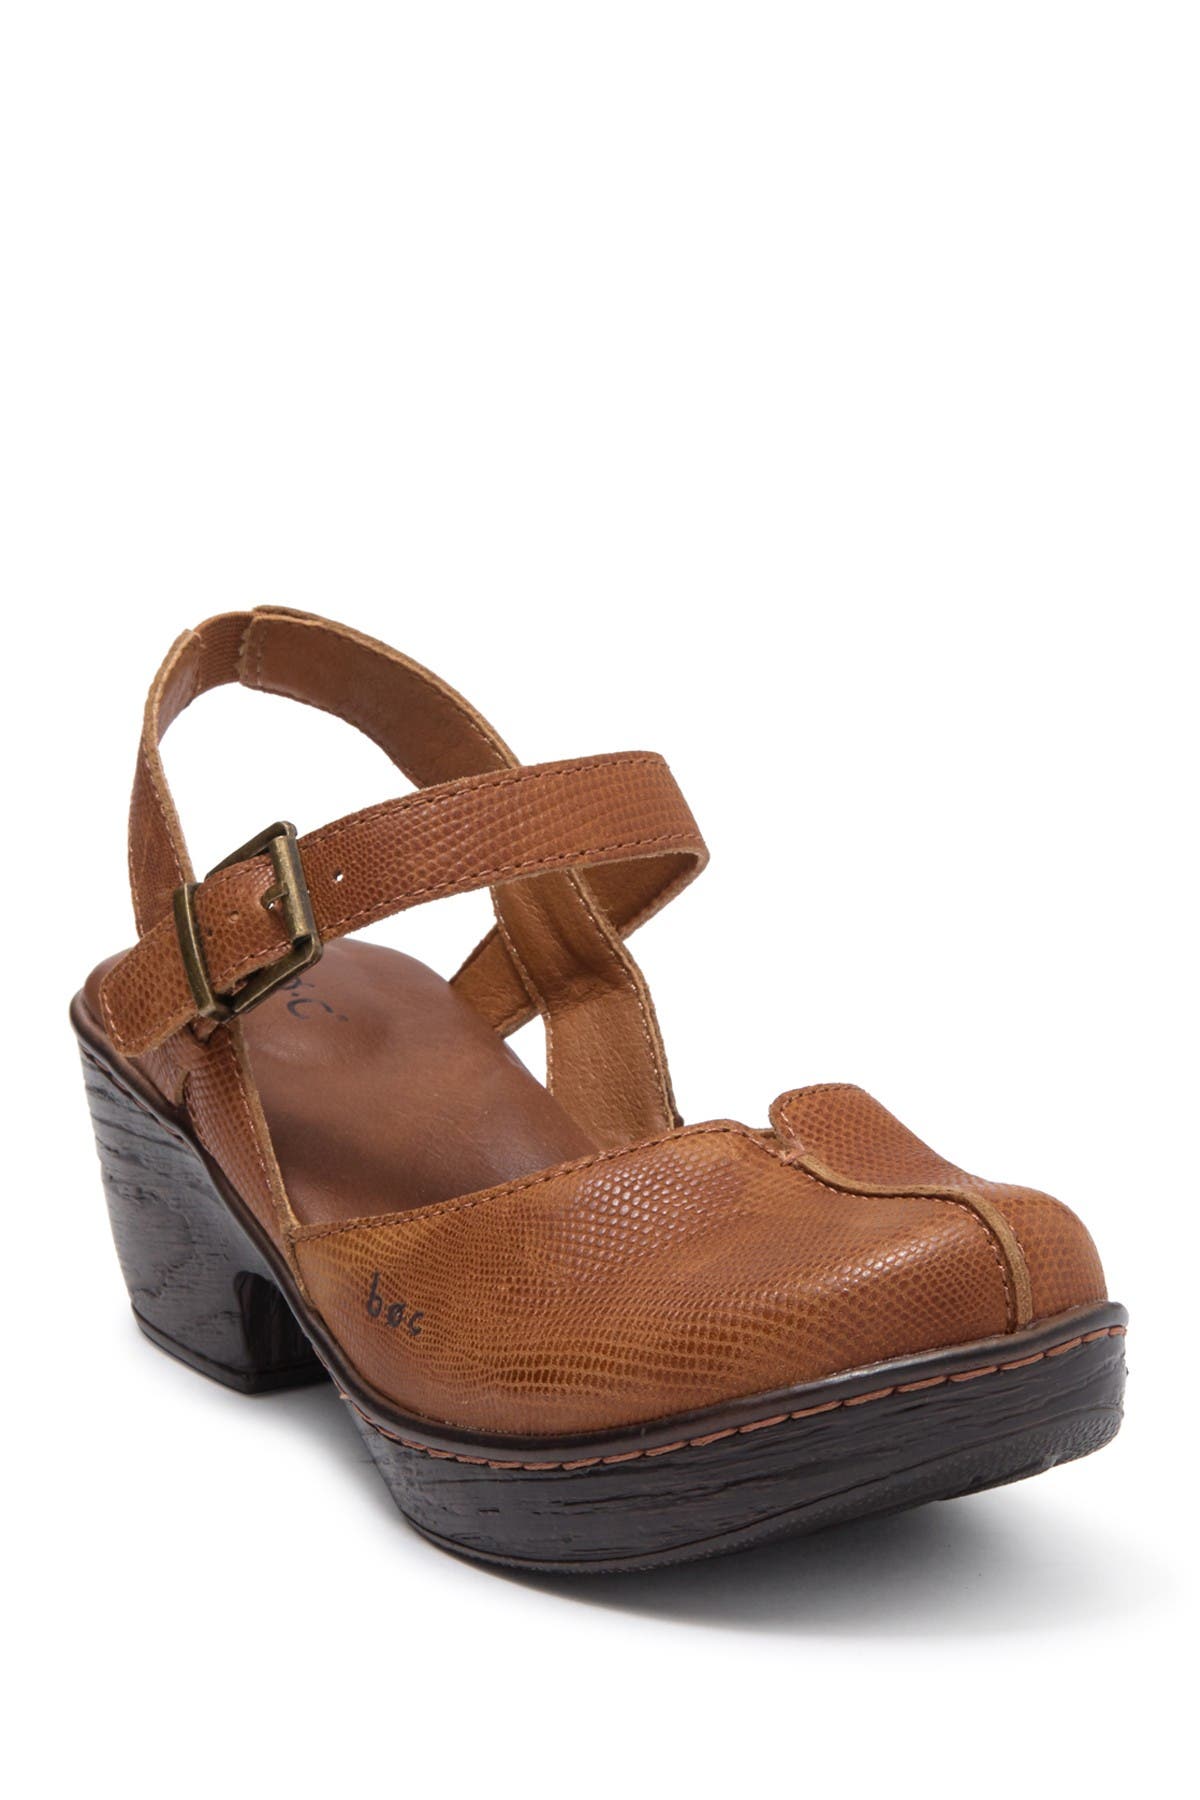 strappy clog sandals